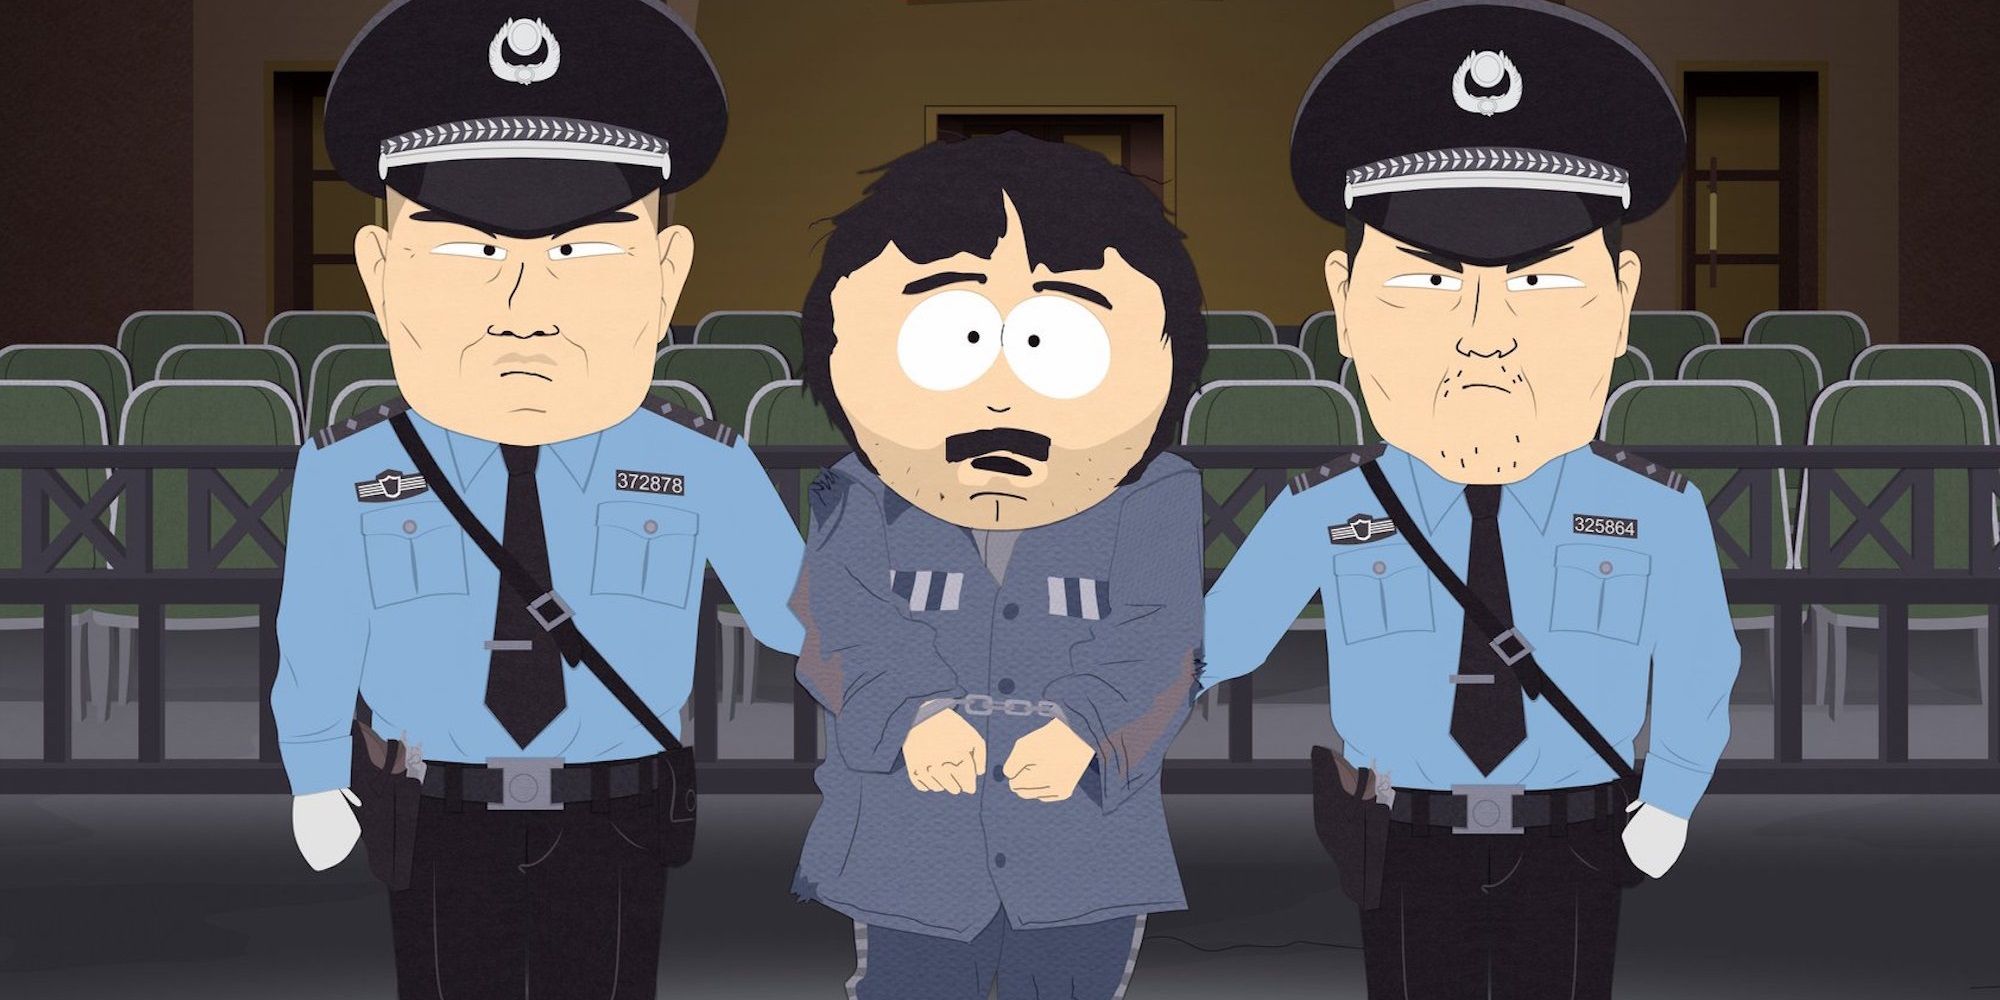 Two security guards stand next to Randy who is handcuffed in South Park.